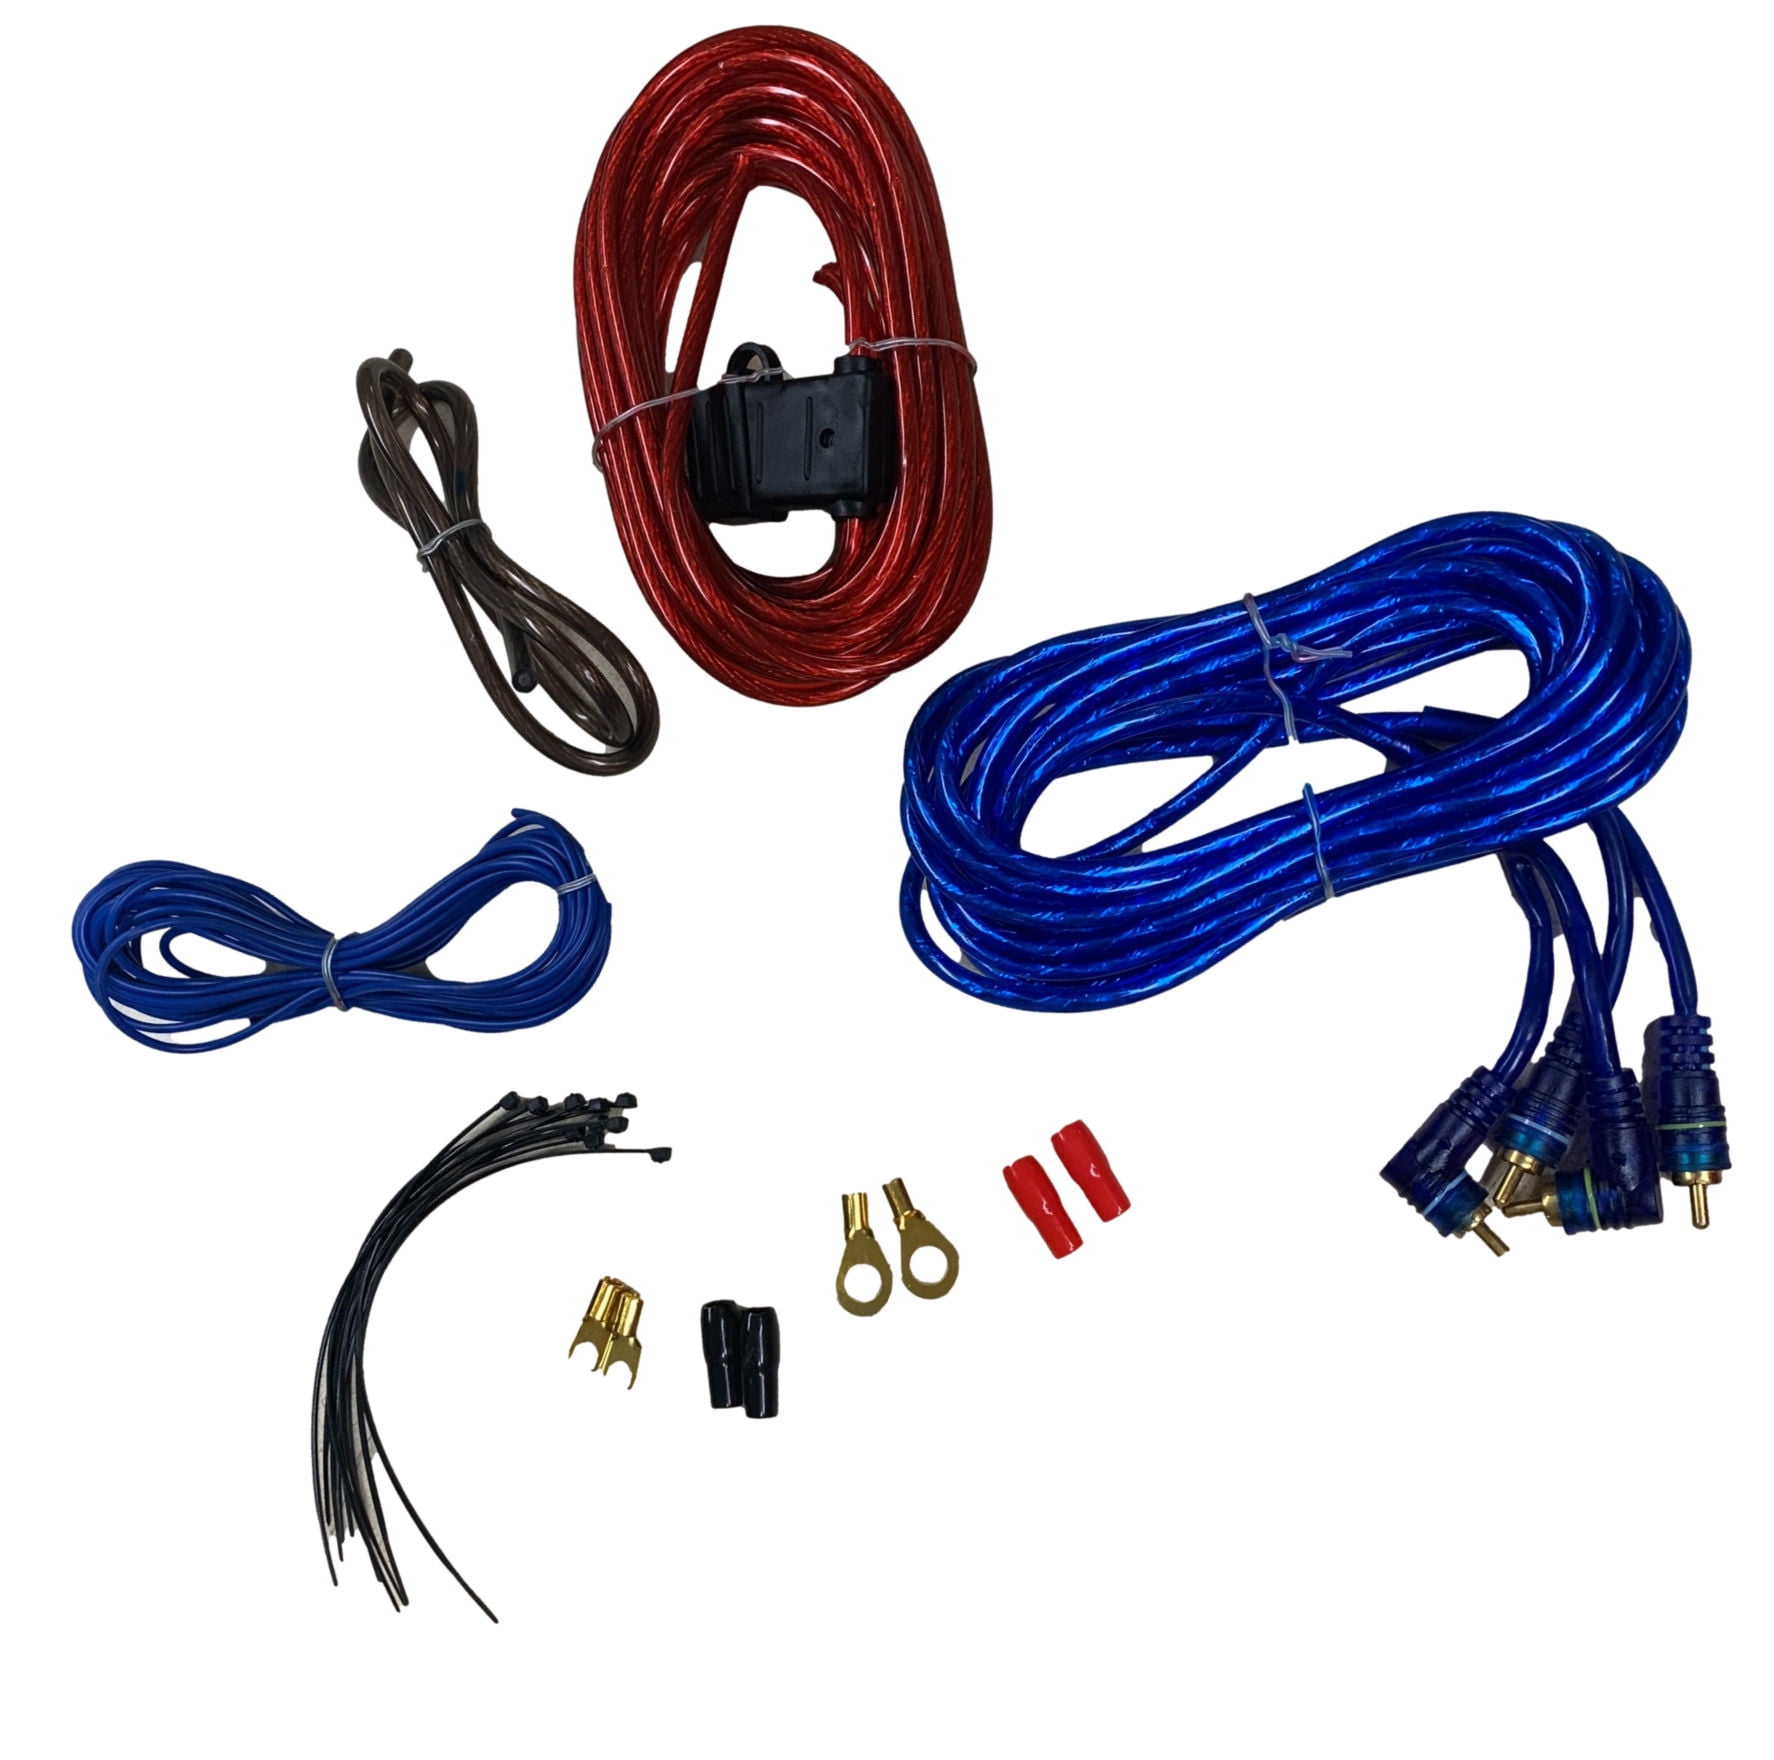 1500W 8 Gauge Car Amplifier Installation Wiring Kit Amp Red Power Wire Cable 